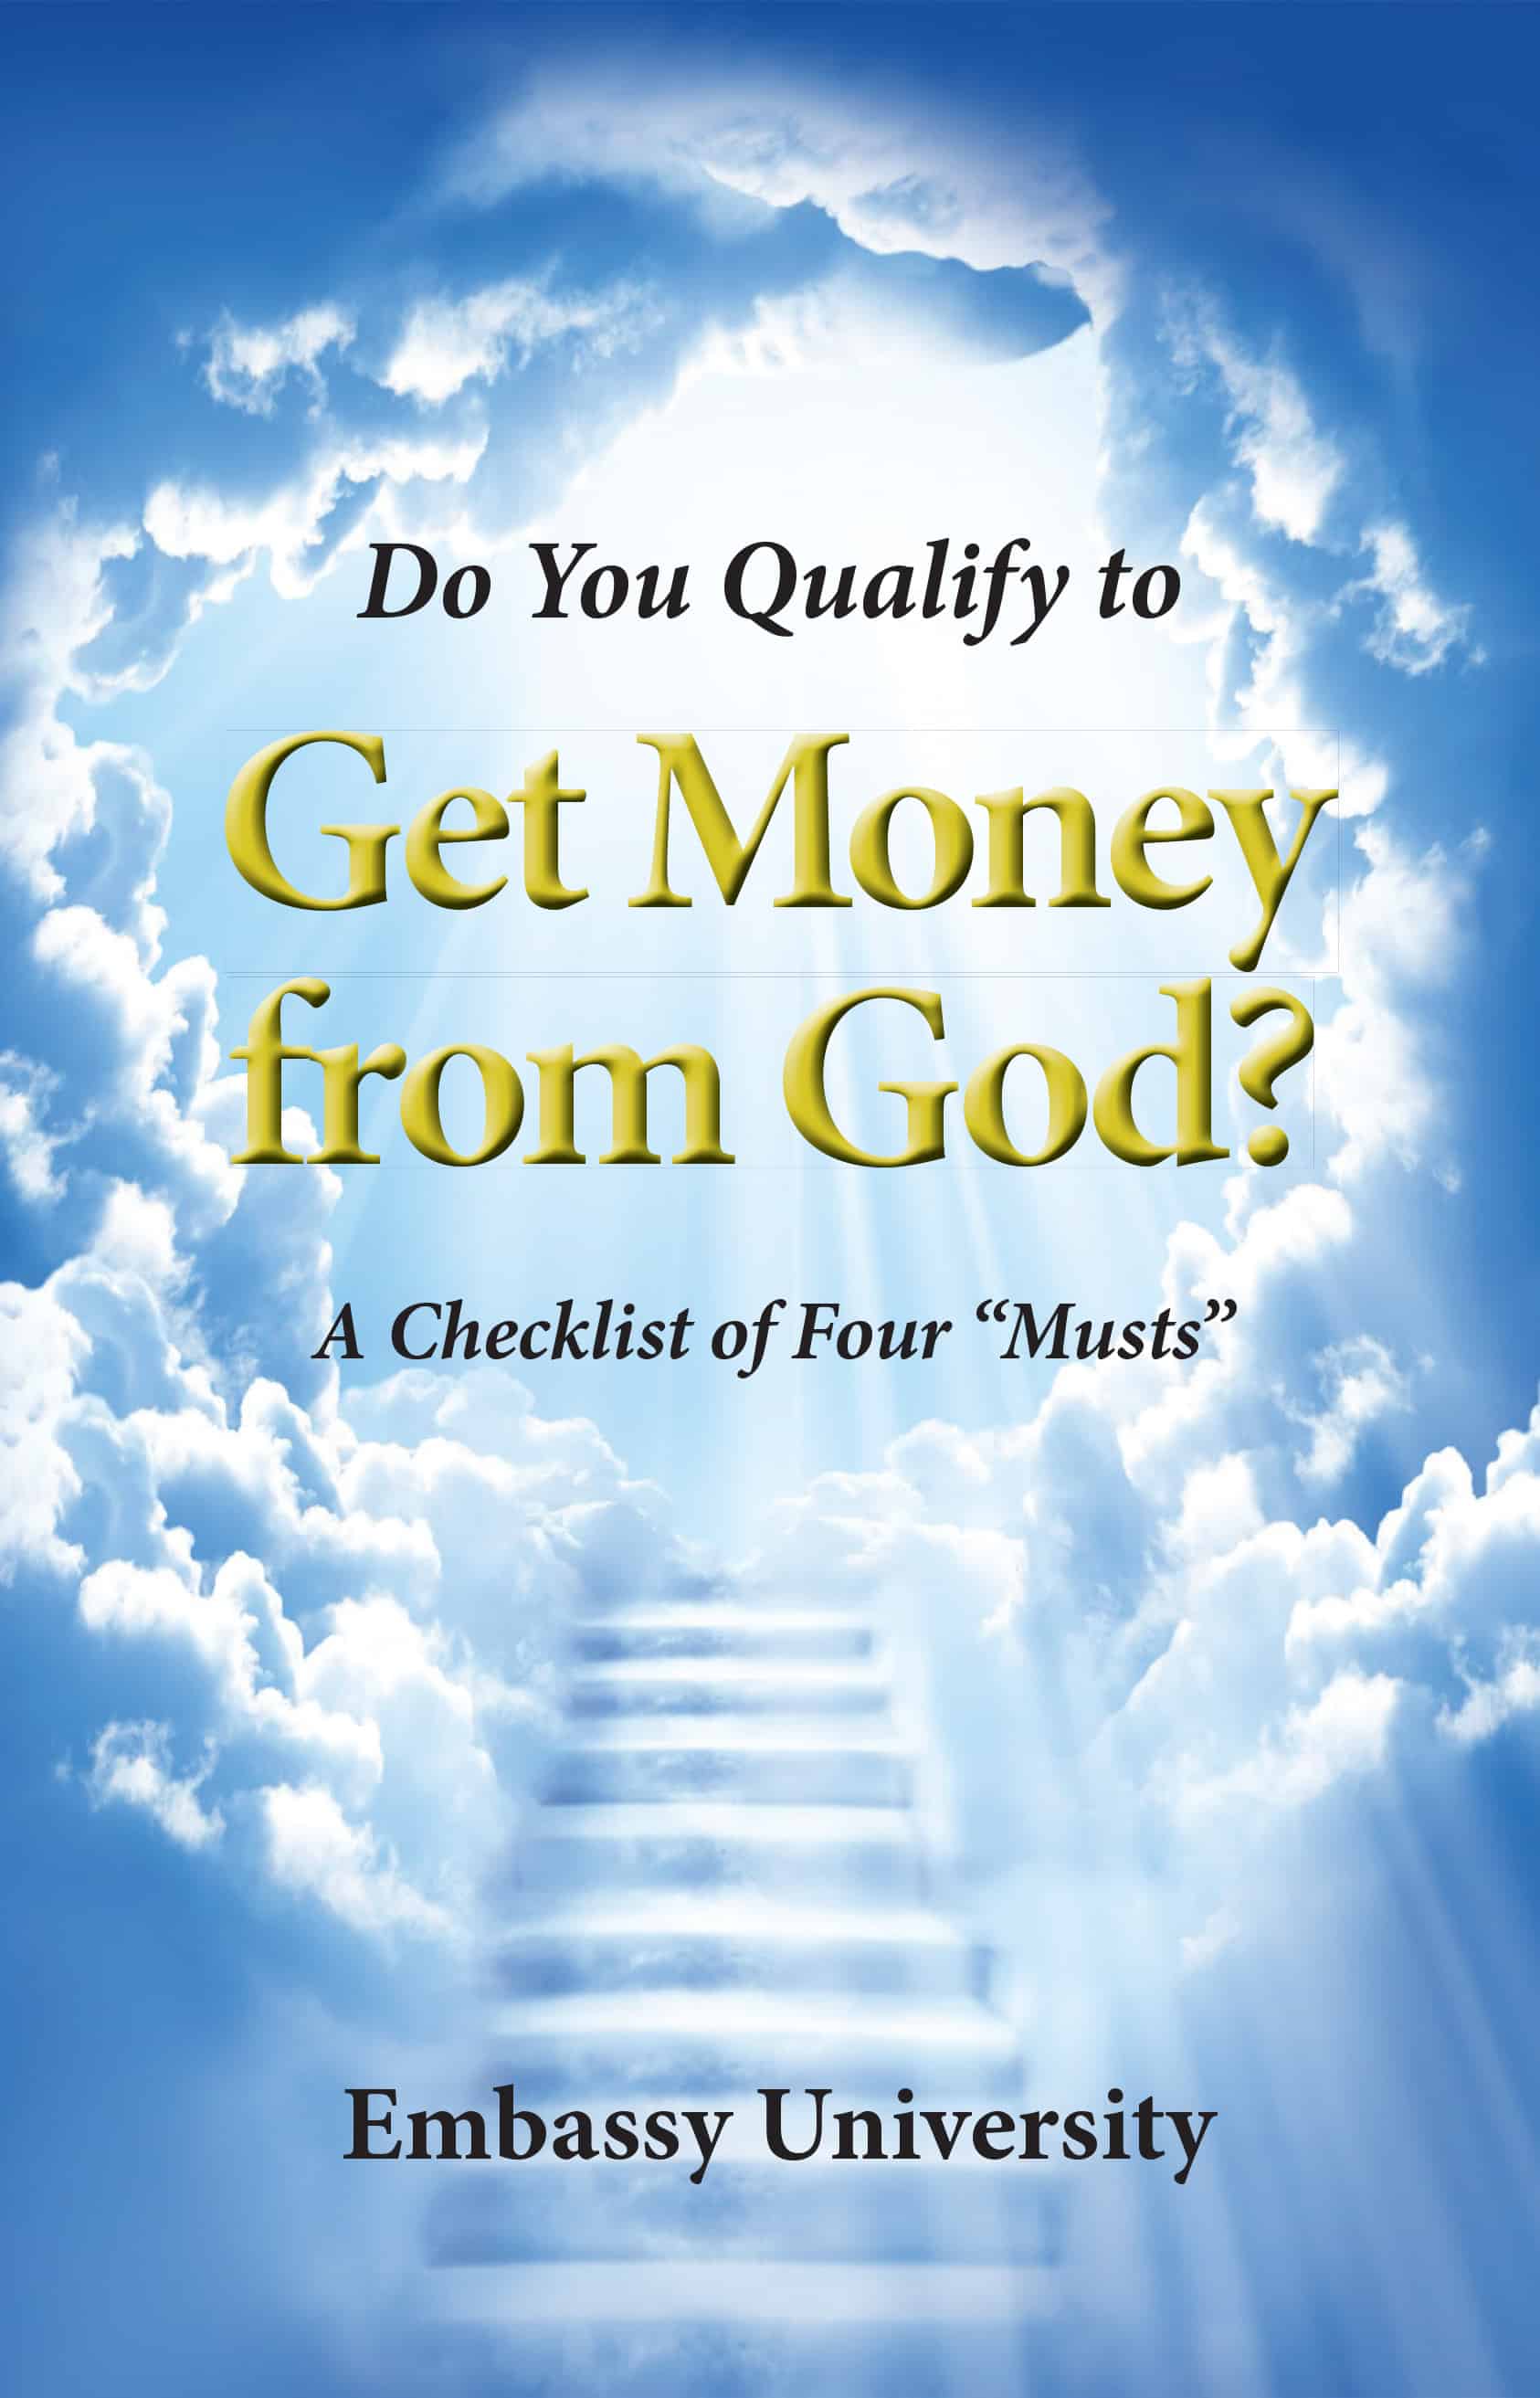 Do You Qualify to Get Money From God